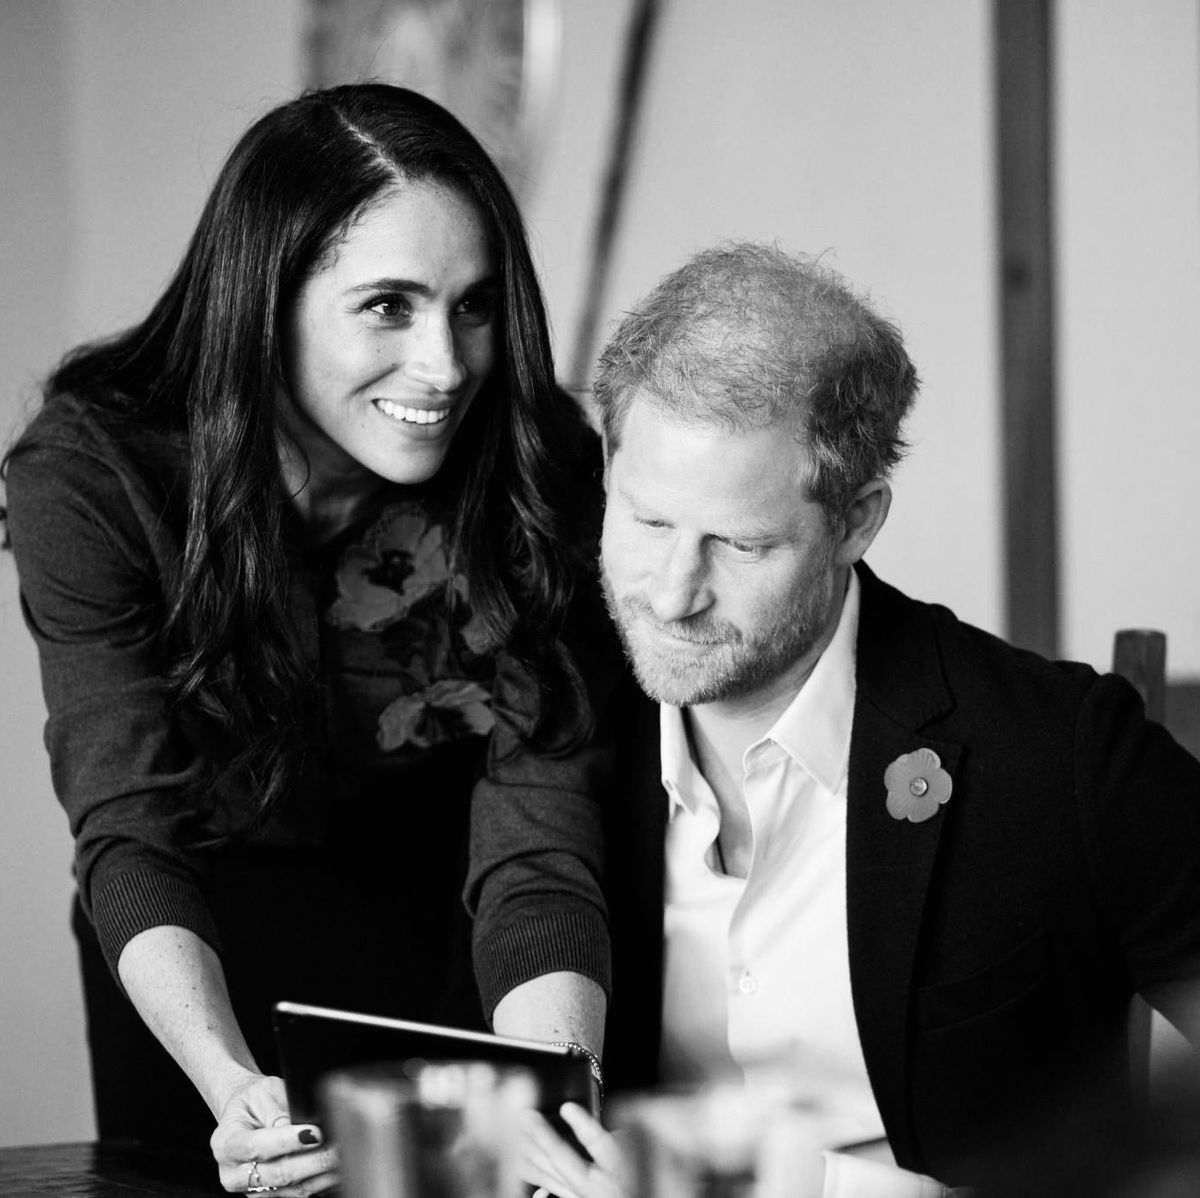 Meghan Markle's 'Suits' Line That Was Killed By Royal Family